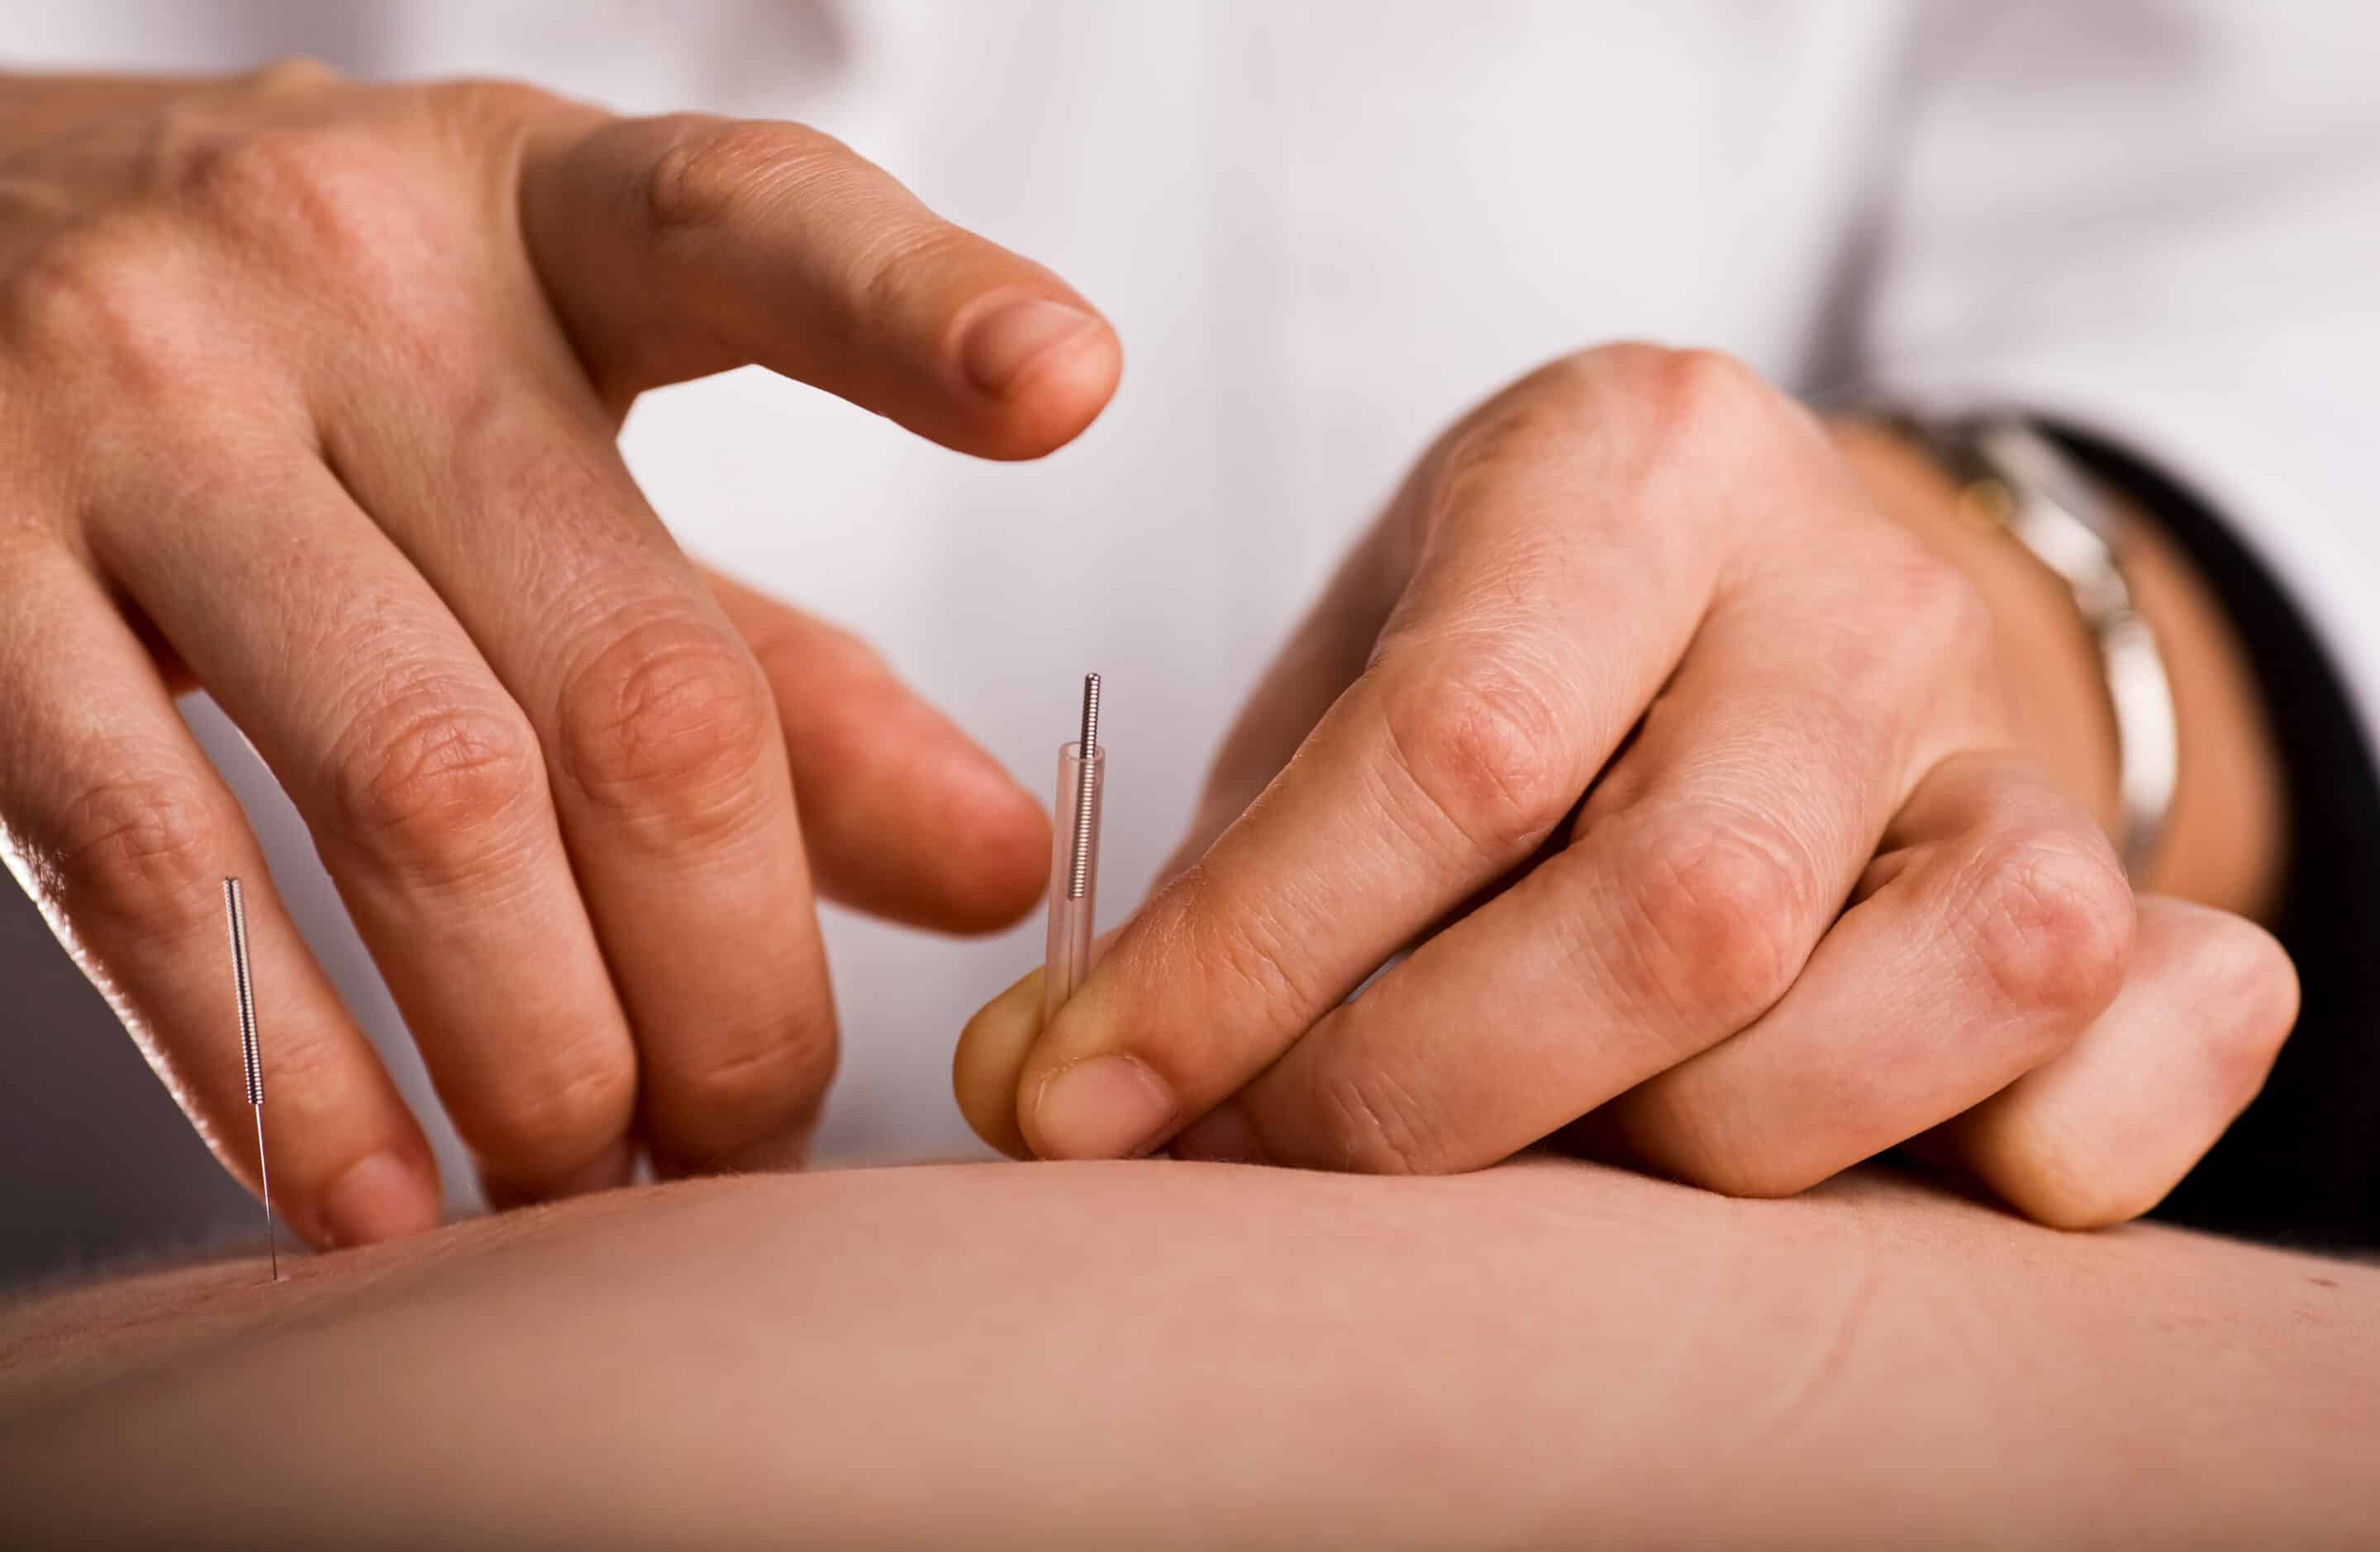 Acupuncture for Addiction Treatment?